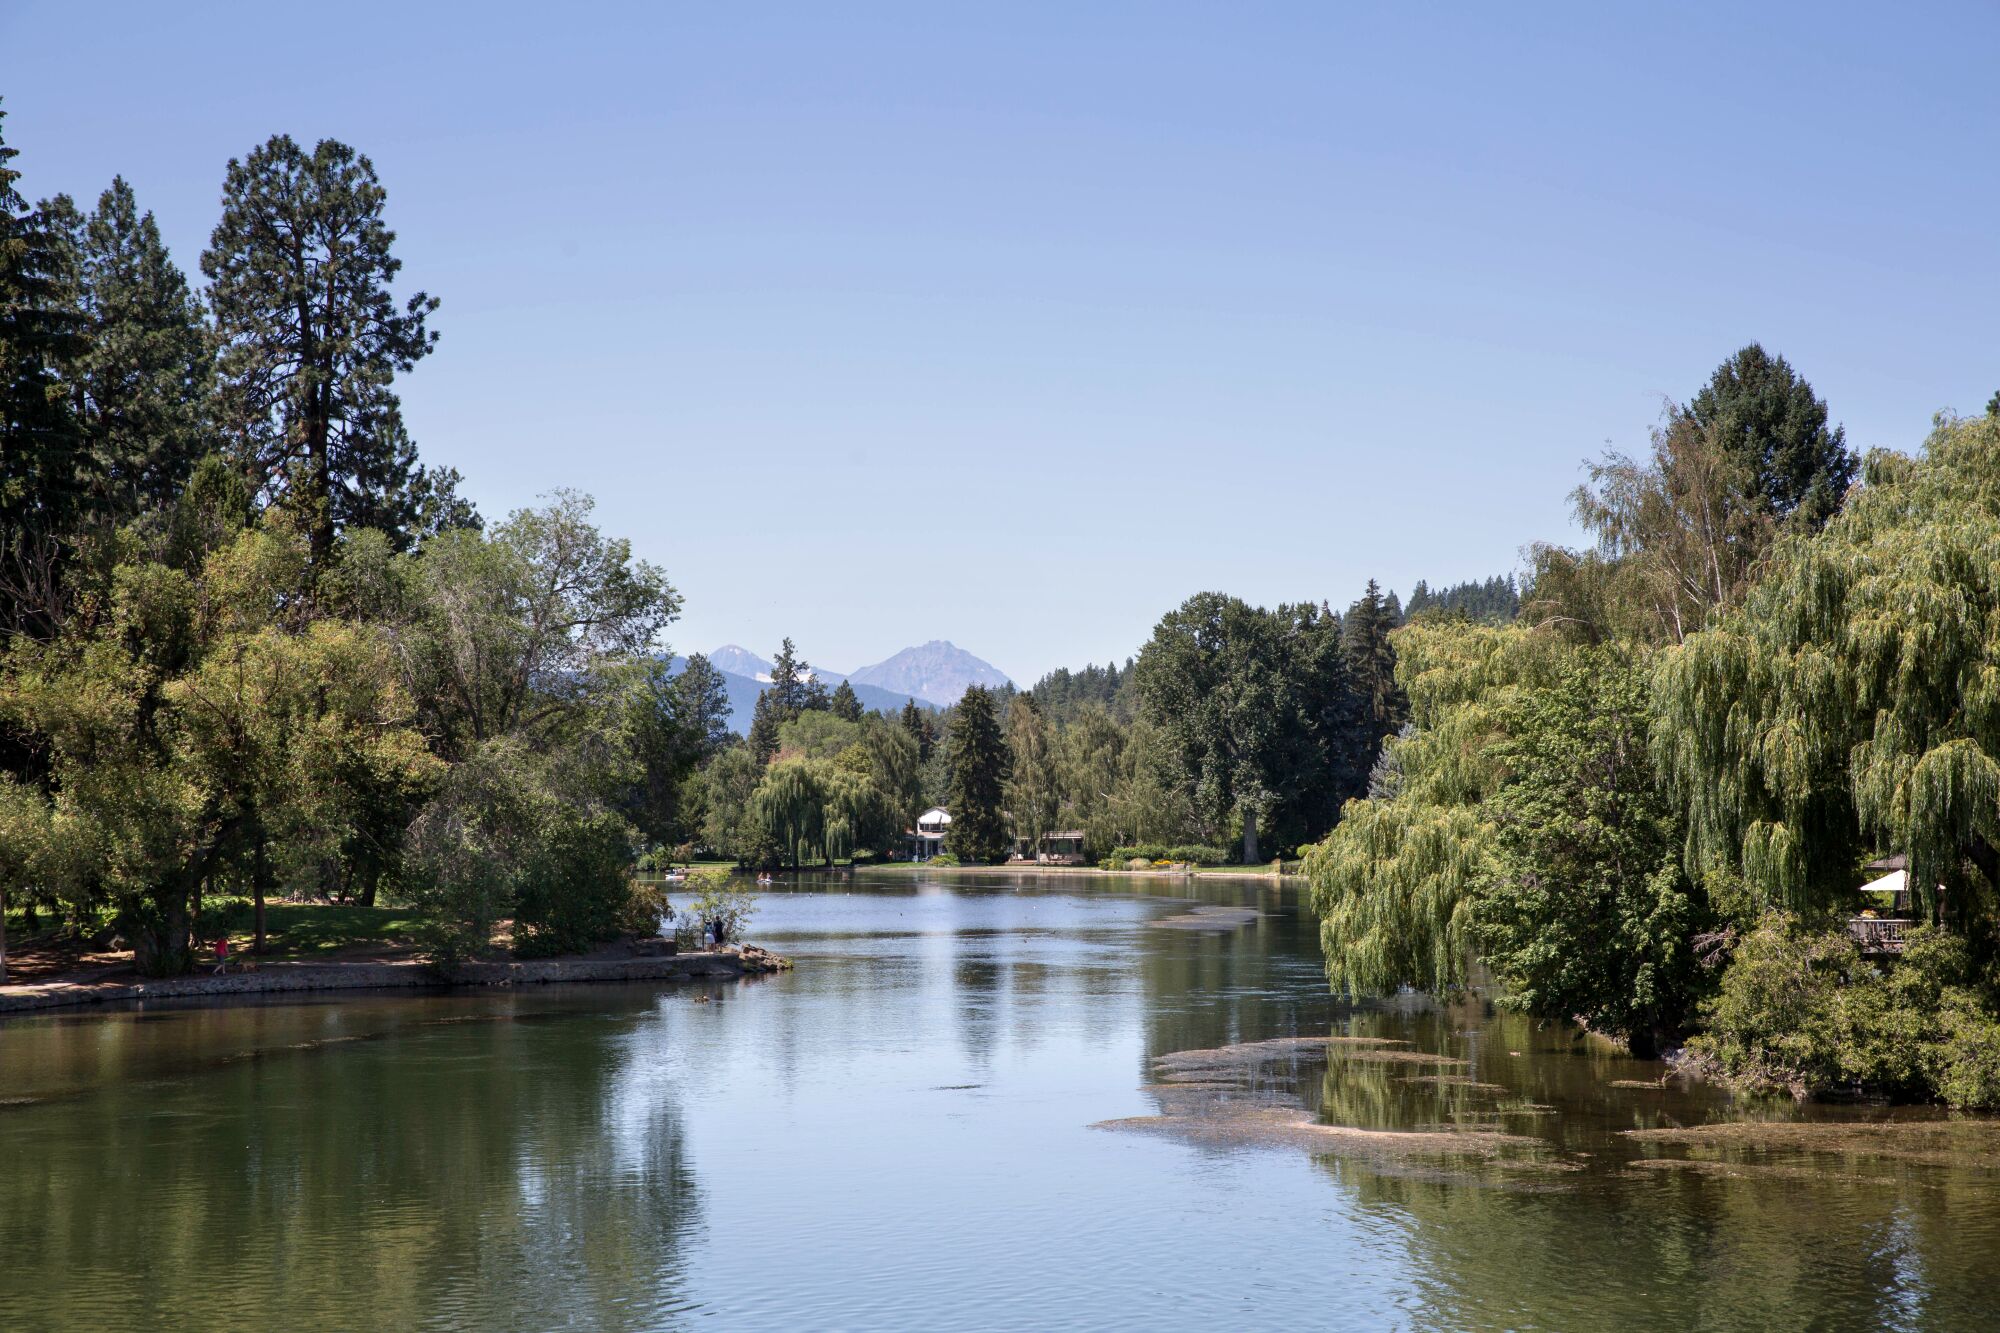 A calm river meandering past green trees under a blue sky, with the top of a mountain visible in the background